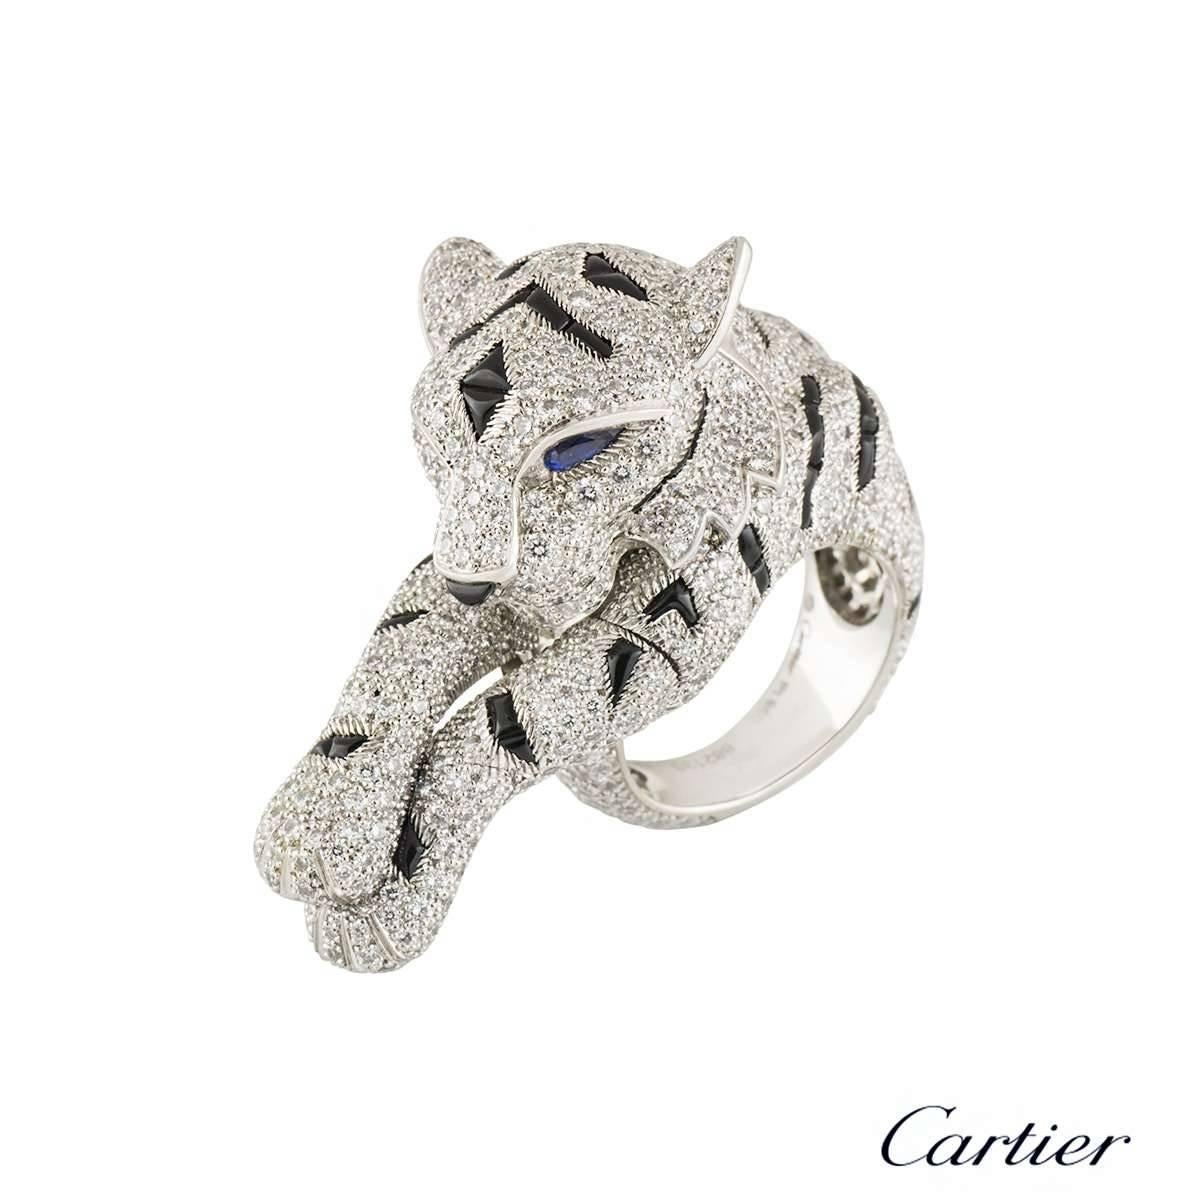 An extraordinary and rare Cartier ring with diamonds, sapphires and onyx dress in platinum from the Pantheré de Cartier collection. The ring comprises of a Panther's head which wraps around the finger, finished off with freely moving paws, giving